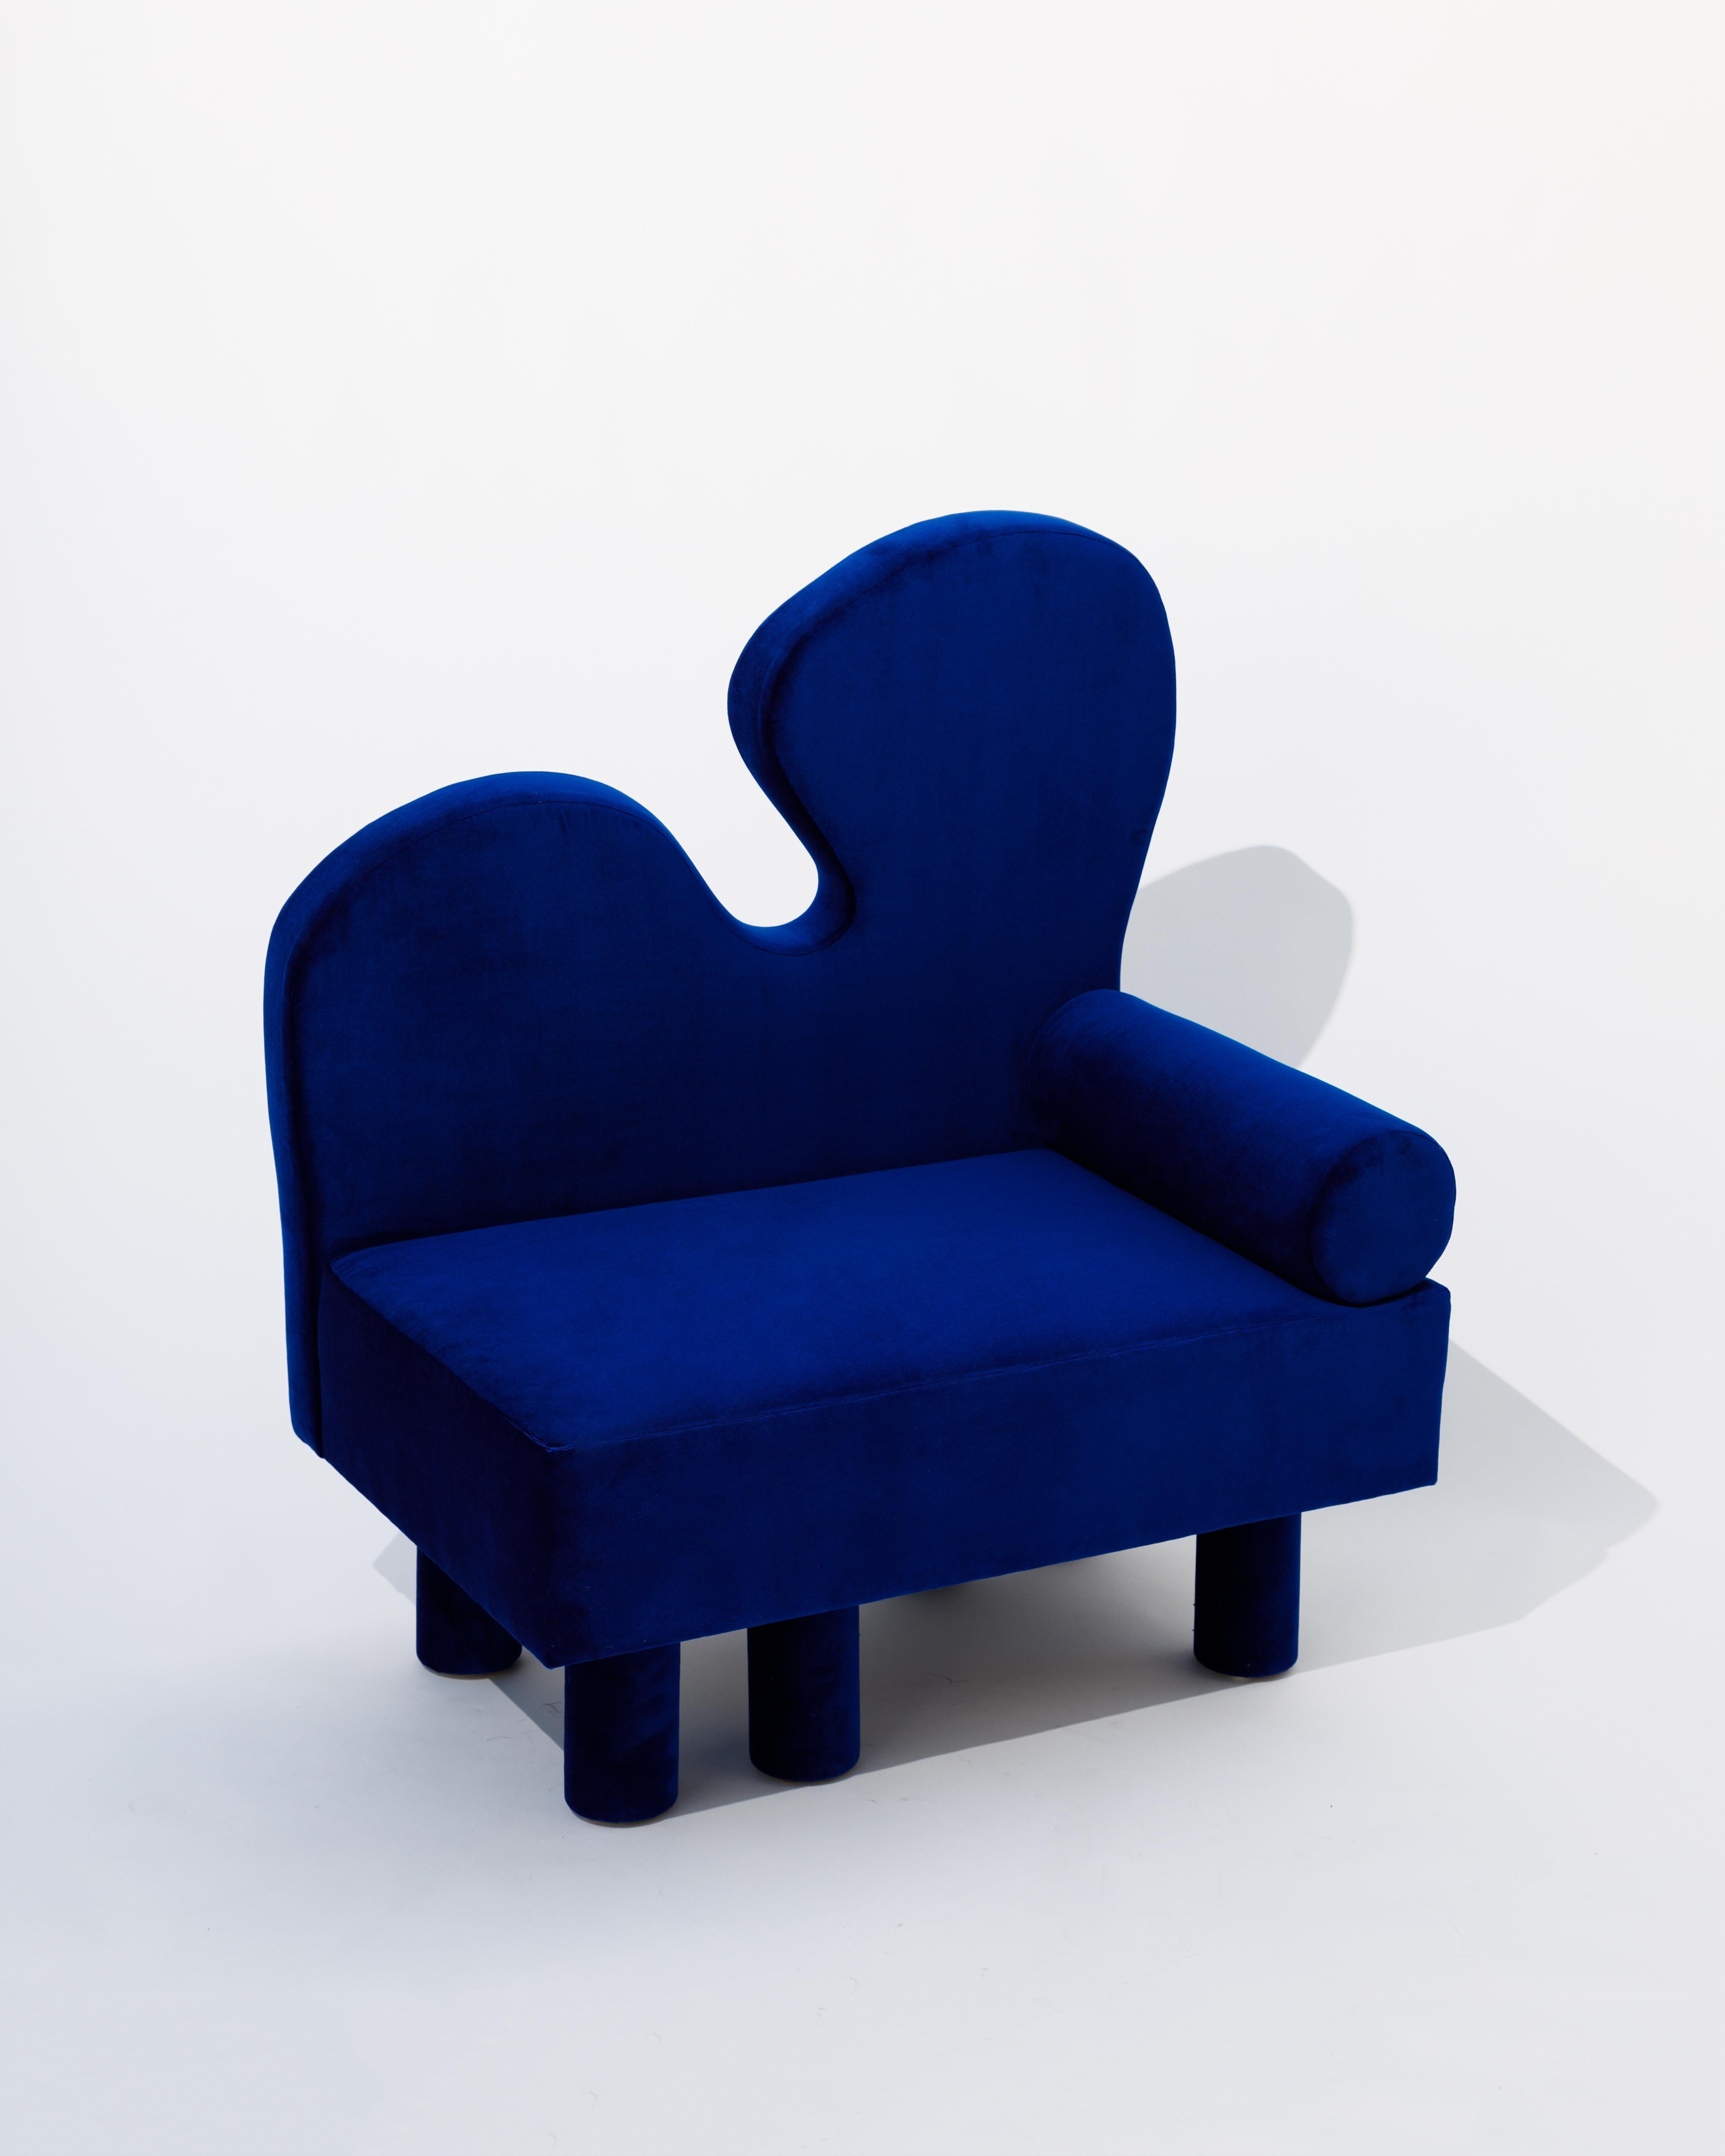 With Bordon, an oversized chair upholstered in a vibrant blue velvet, another human explores fantastical shapes reminiscent of Matisse while creating a dreamlike creature, complete with six chunky legs offset in their placement, creating the feeling